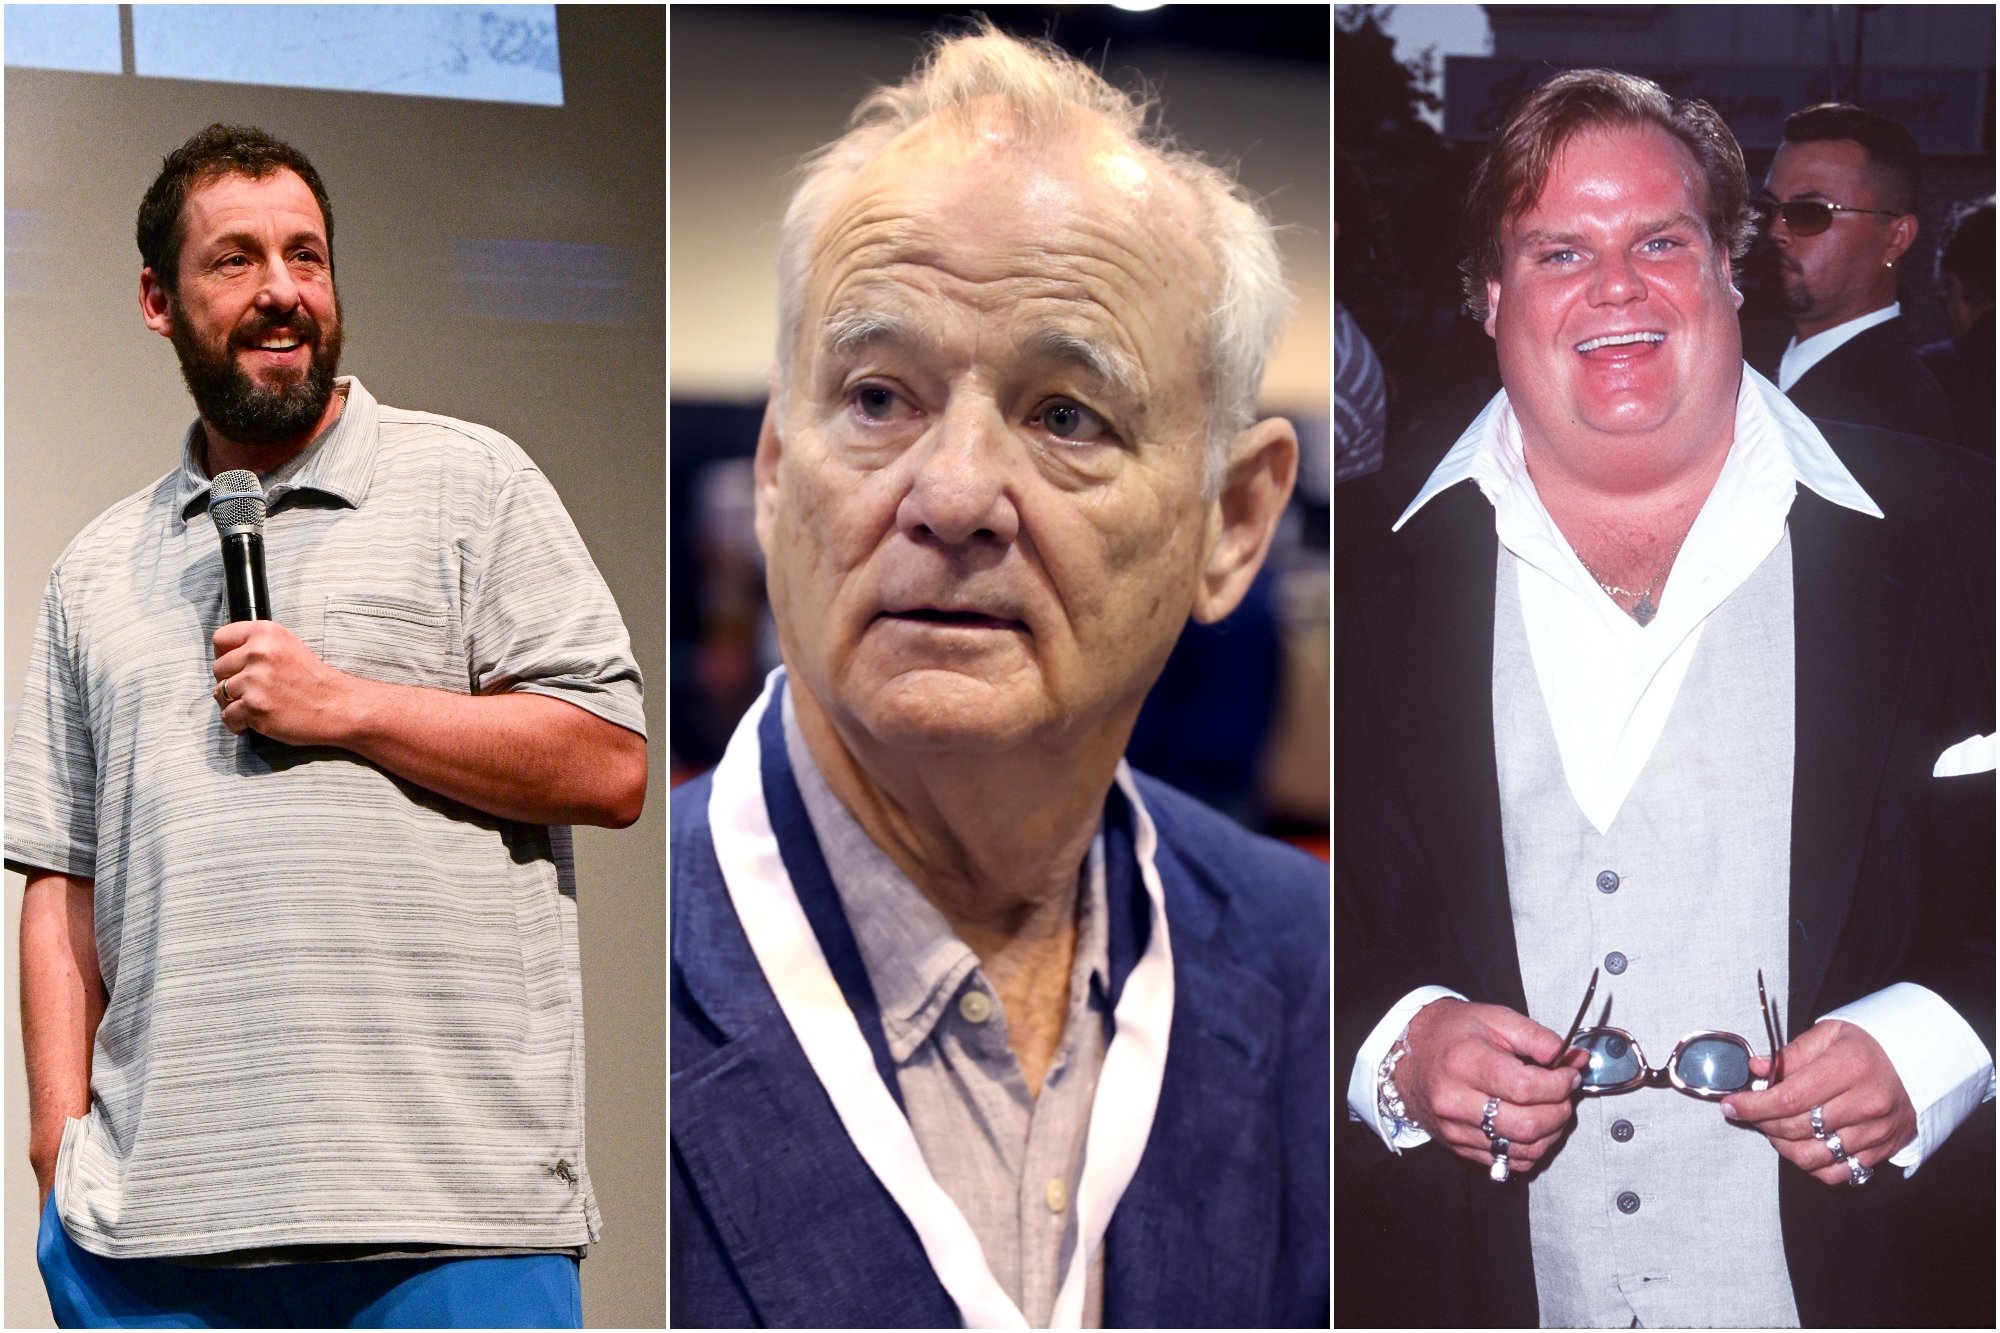 'Saturday Night Live' former cast members Adam Sandler, Bill Murray, and Chris Farley in a collage. Sandler is holding a microphone, Murray is wearing a collared shirt looking to the side, and Farley is wearing a vest under a jacket holding his glasses.